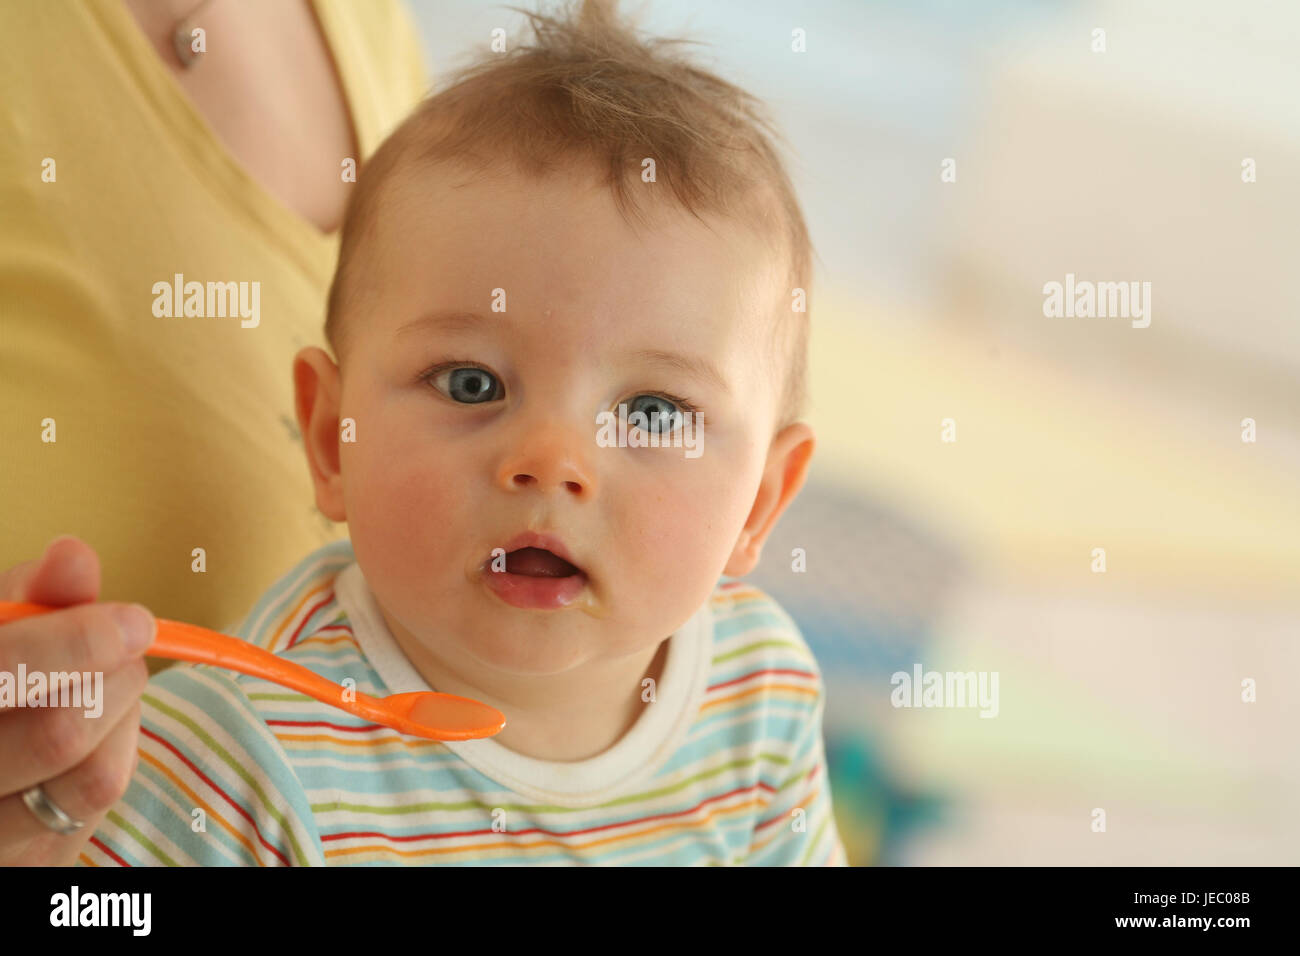 Nut, baby, 7 months, feed, is surprised, dressed, eat, Indoor, boy, curiosity, spoons, hunger, view, portrait, curled, diverted, doubtfully, people, woman, Stock Photo